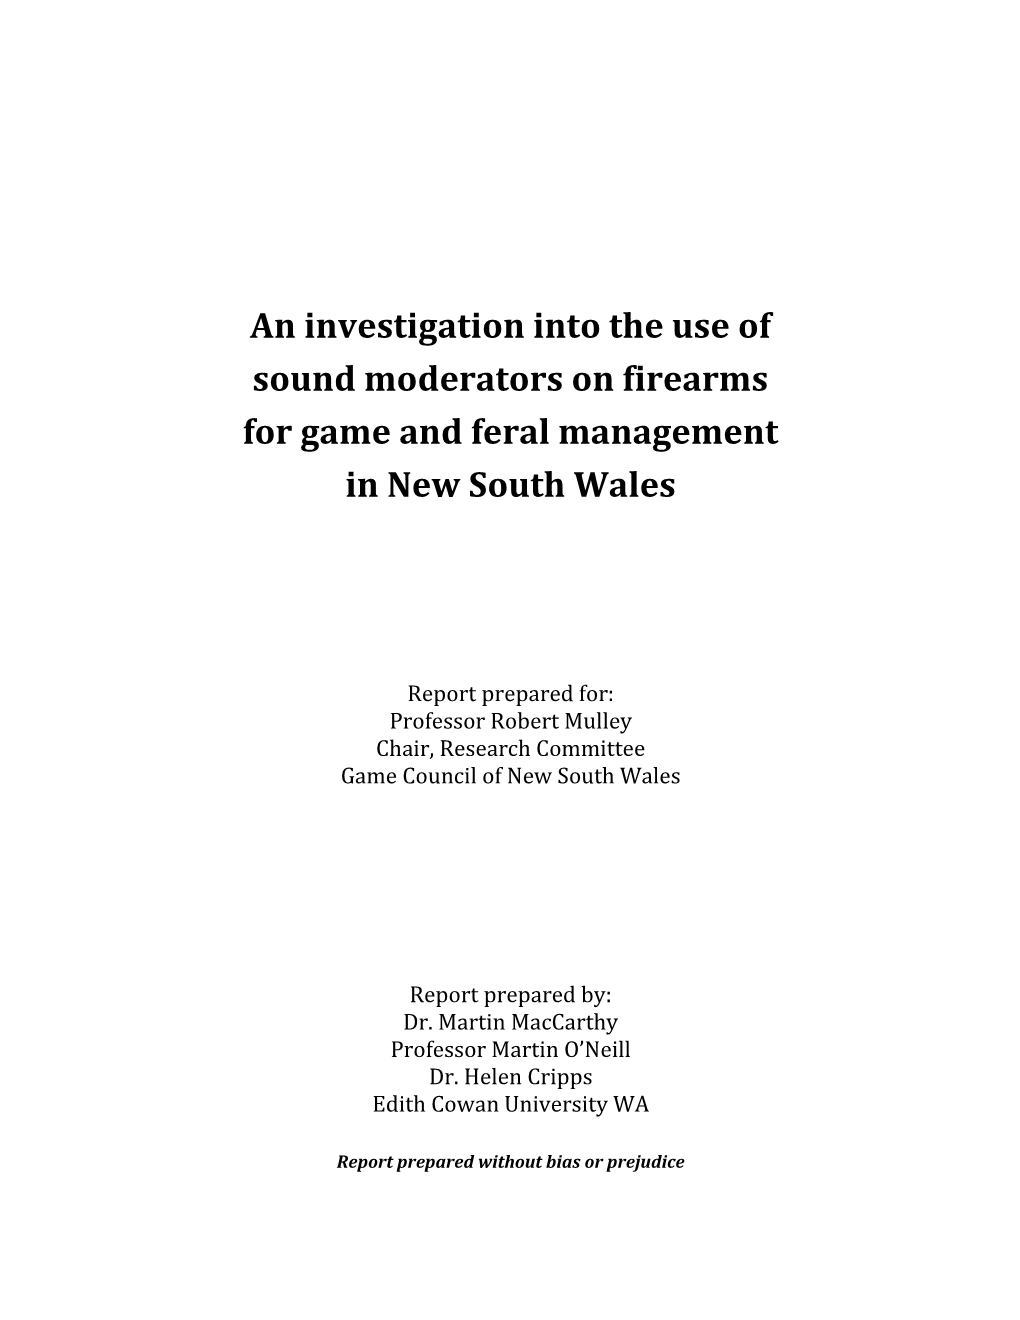 An Investigation Into the Use of Sound Moderators on Firearms for Game and Feral Management in New South Wales